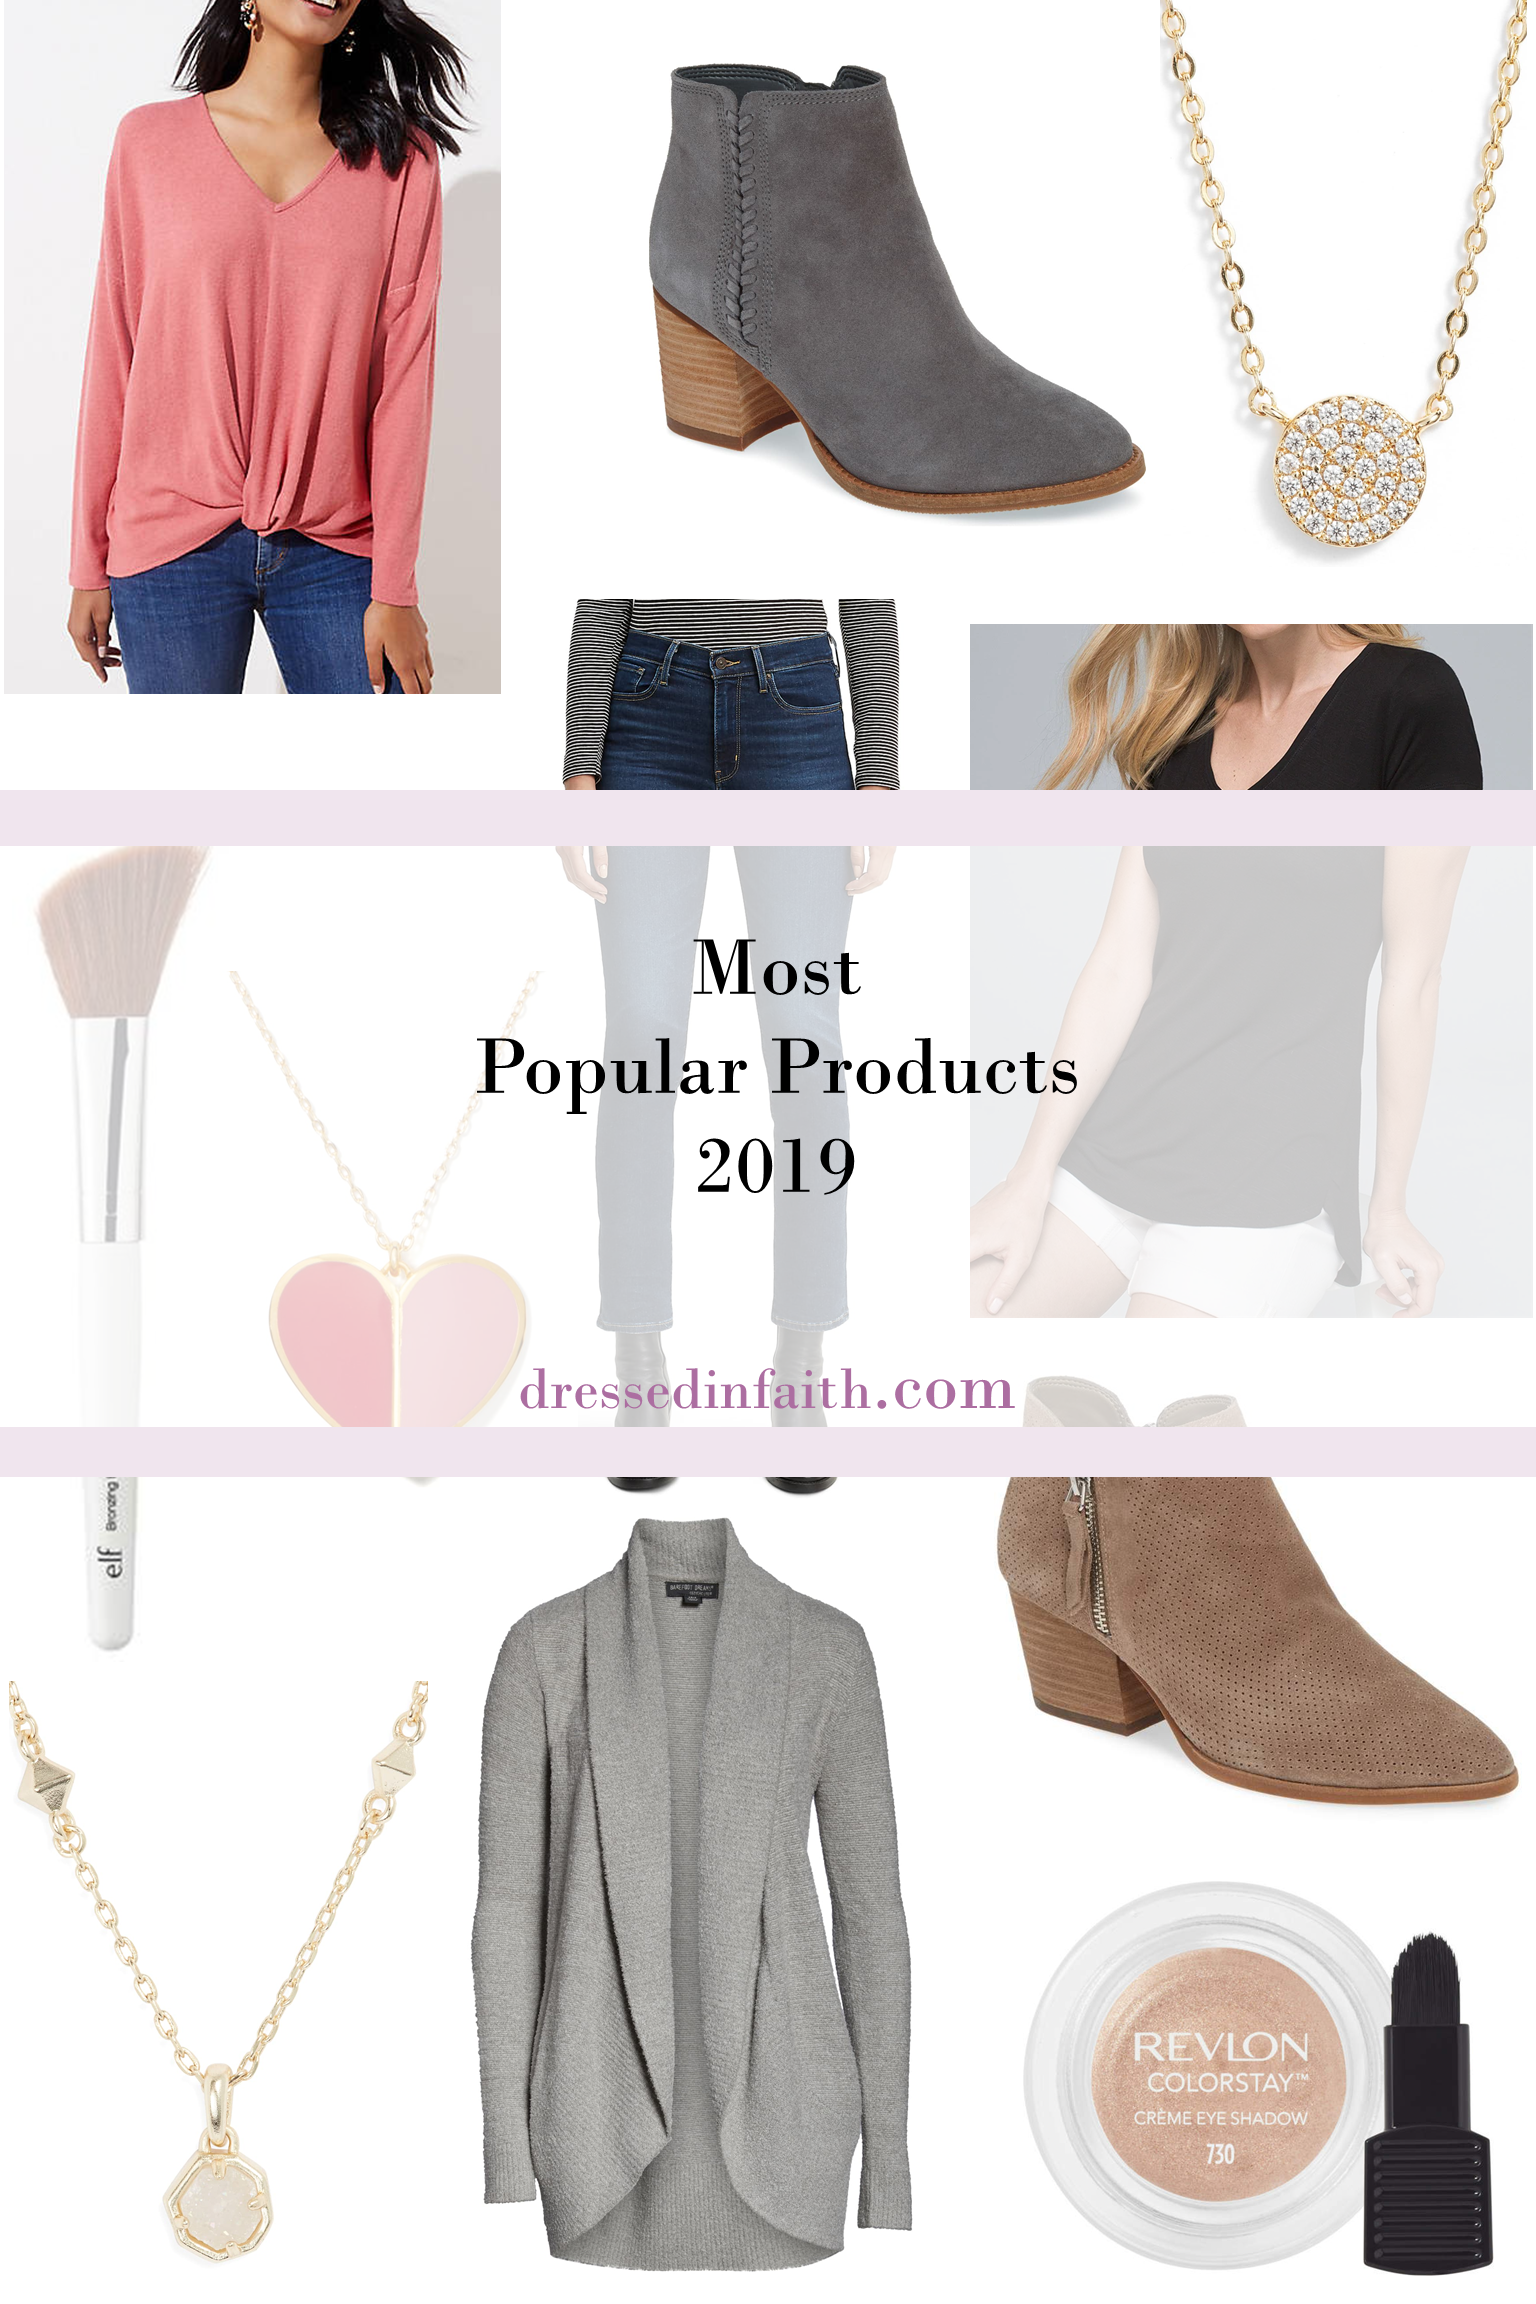 Most Popular Products 2019